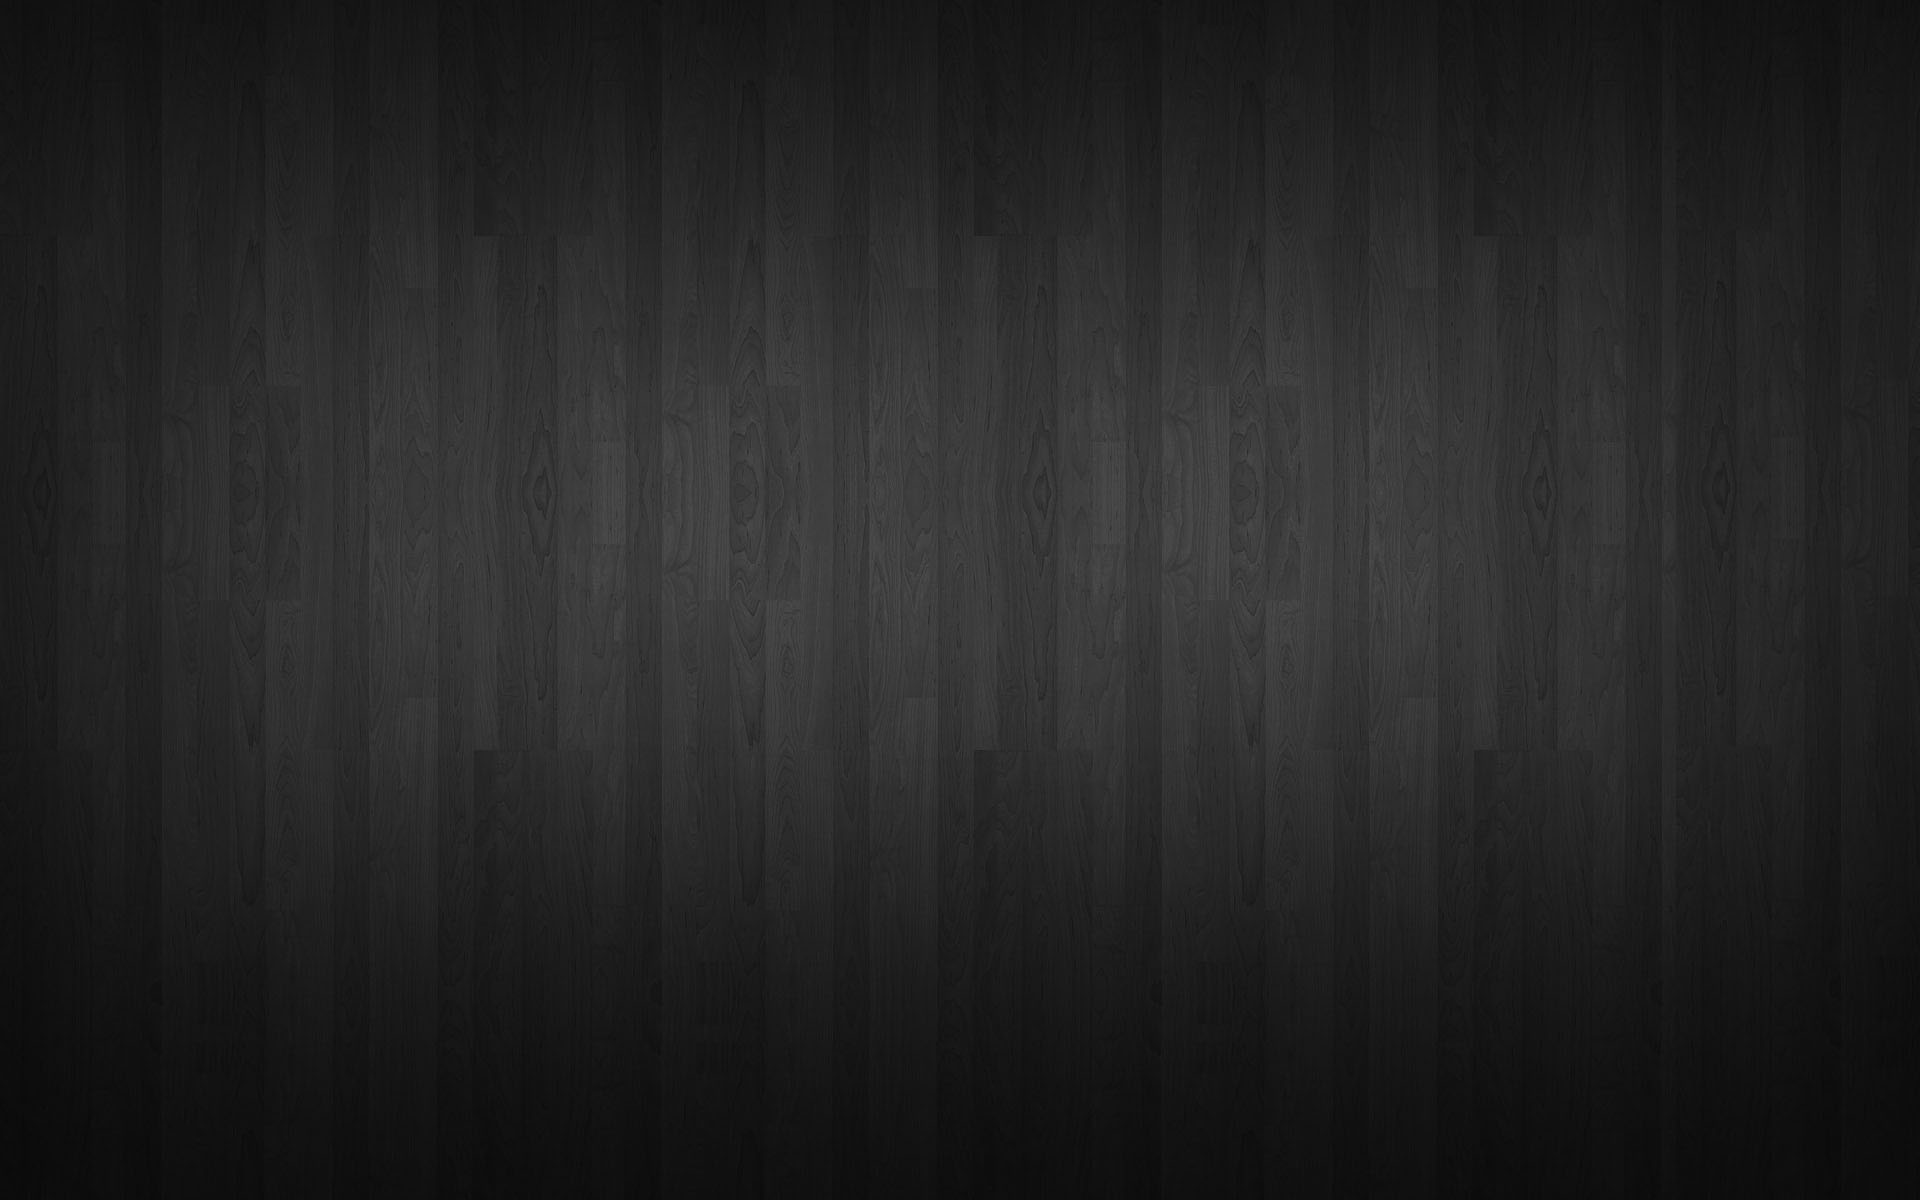 Html background image with abstract pattern in black and grey gradient shade